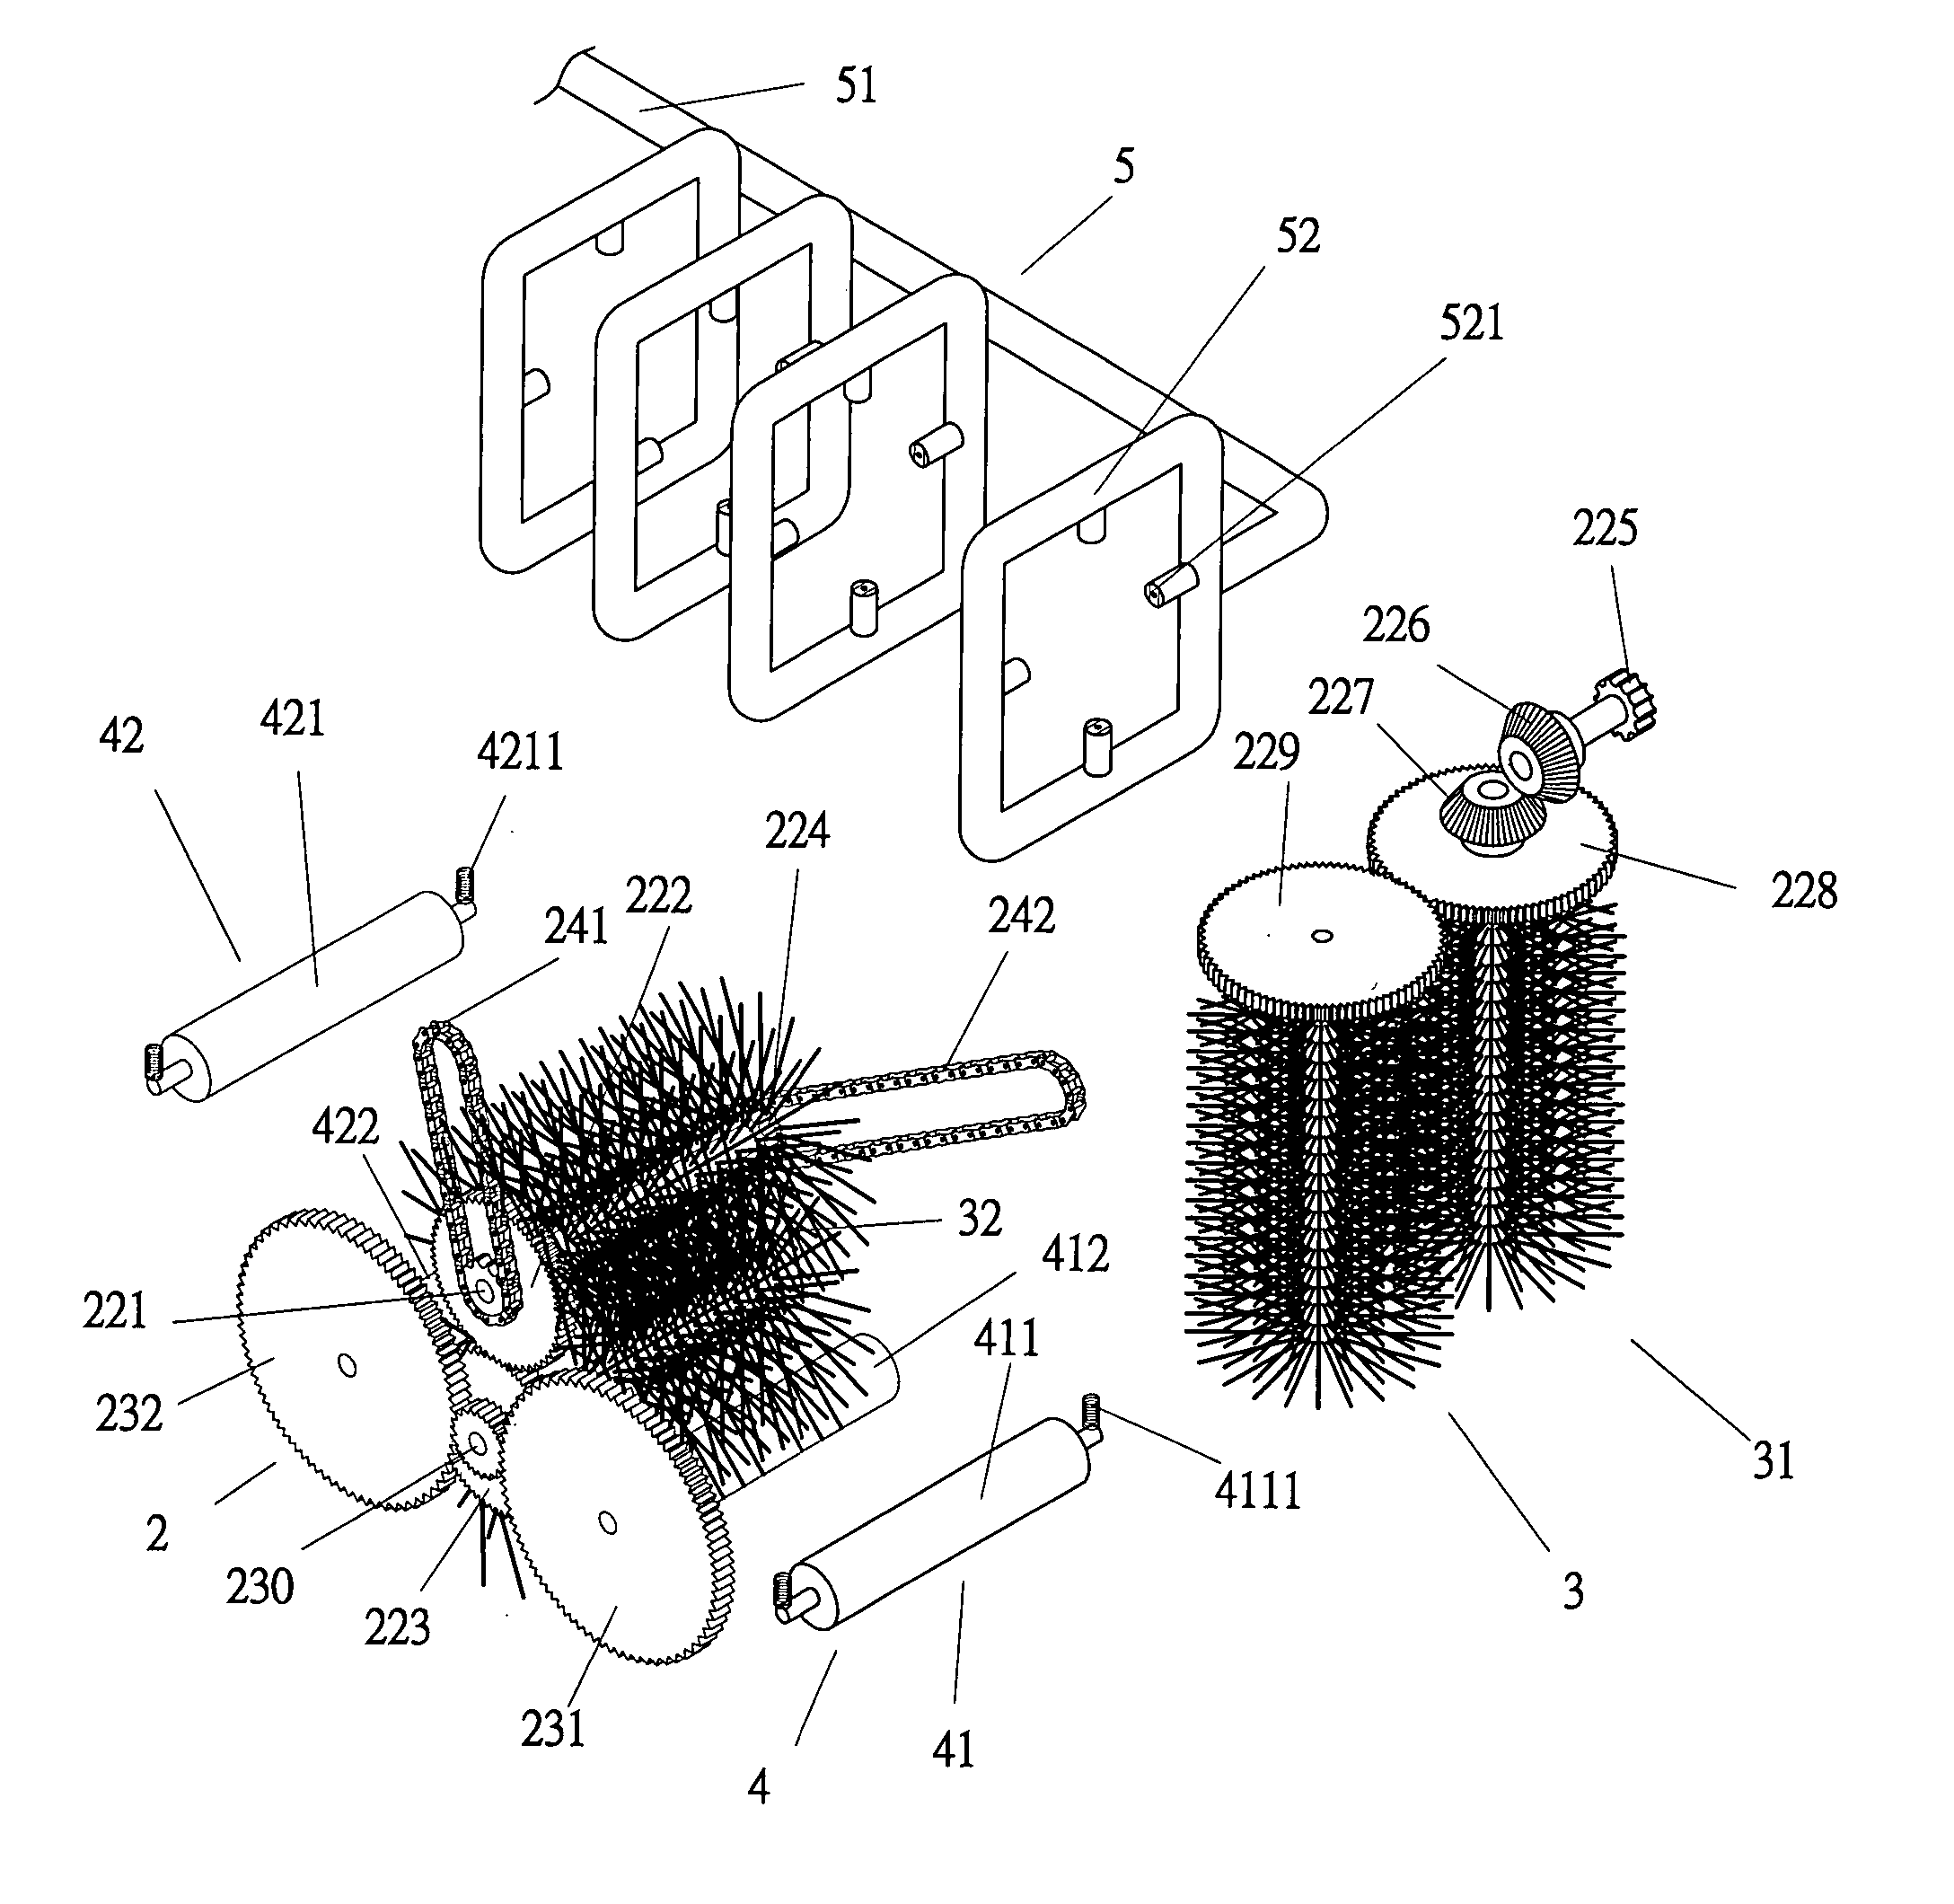 Filter cartridge cleaning apparatus